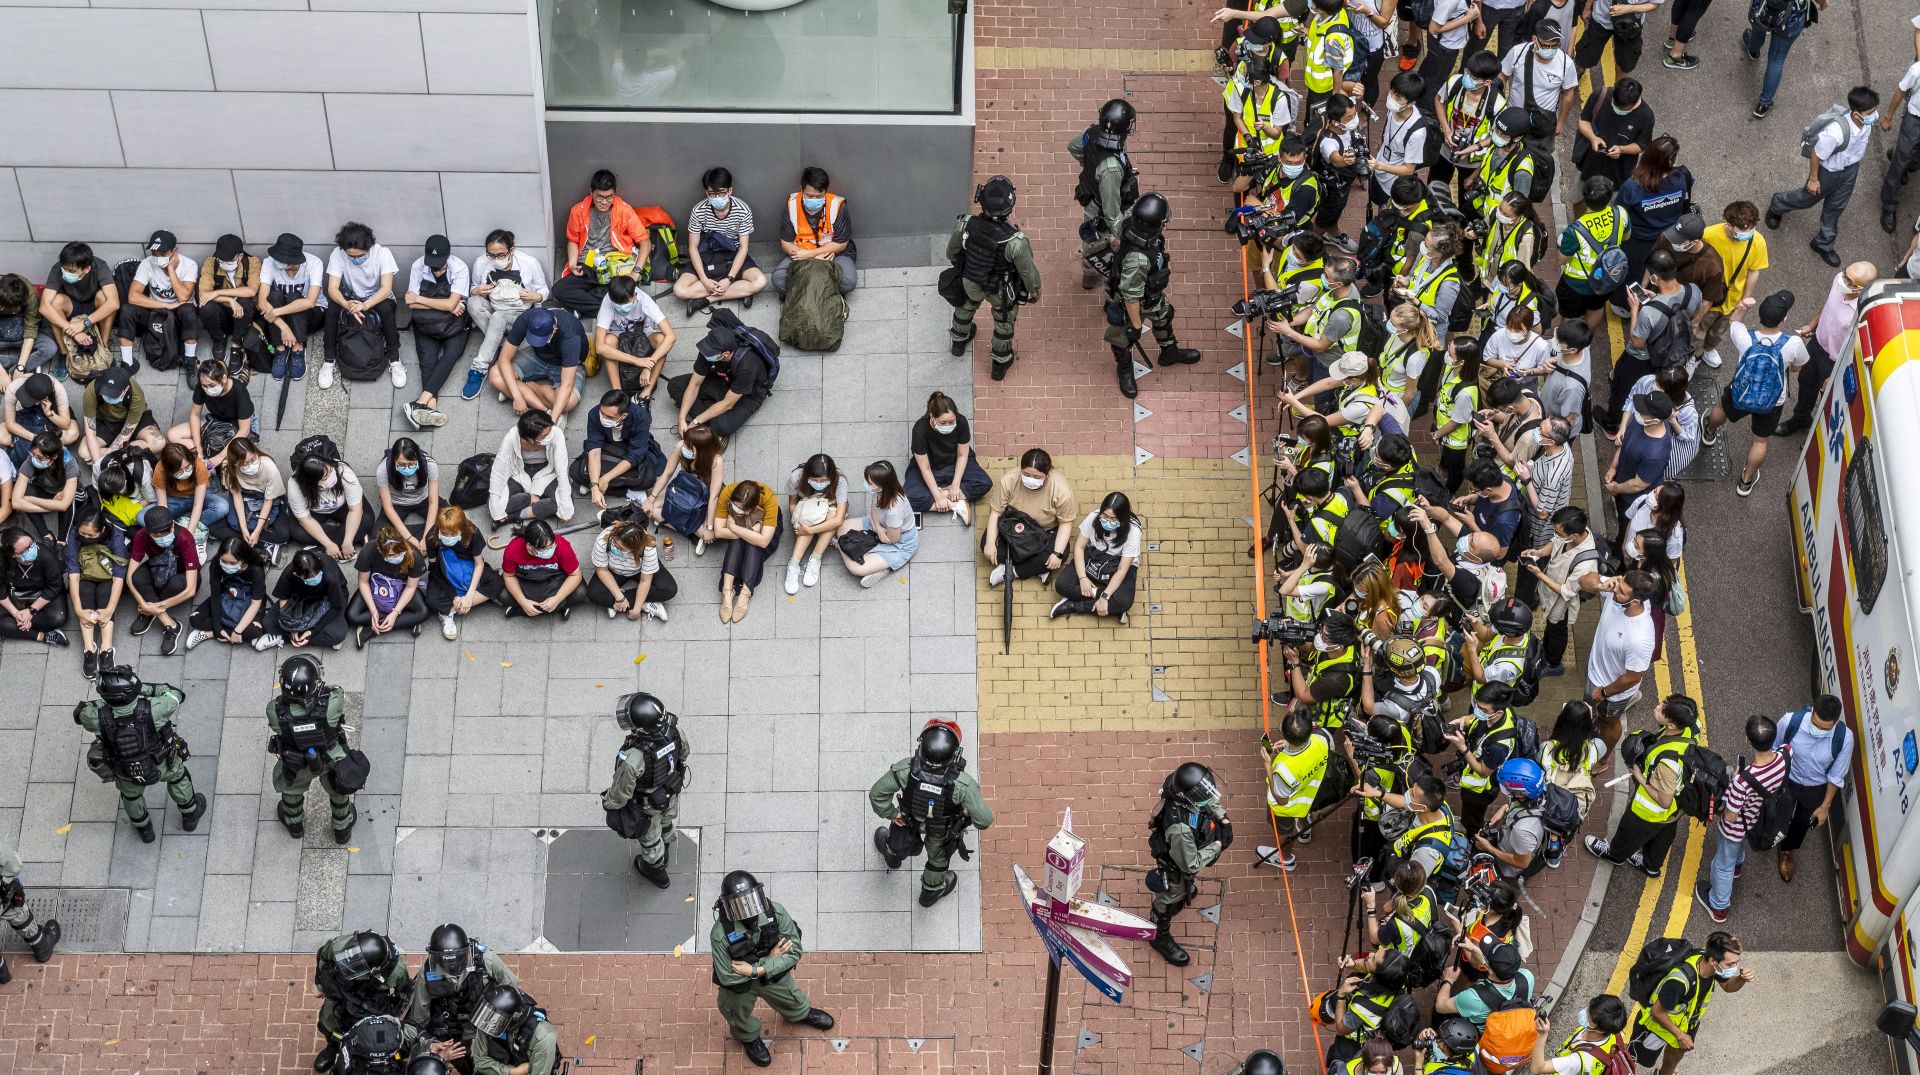 epaselect epa08446614 A large group of detainees are seen sitting on the ground as police has set up a police cordon around the area in Causeway Bay, Hong Kong, China, 27 May 2020. The Second Reading debate on the National Anthem Bill is set to resume at the Legislative Council on 27 May amid growing anger at Beijing's plan to impose a national security law on the city banning sedition, secession and subversion through a method that could bypass Hong Kong's legislature.  EPA/MIGUEL CANDELA